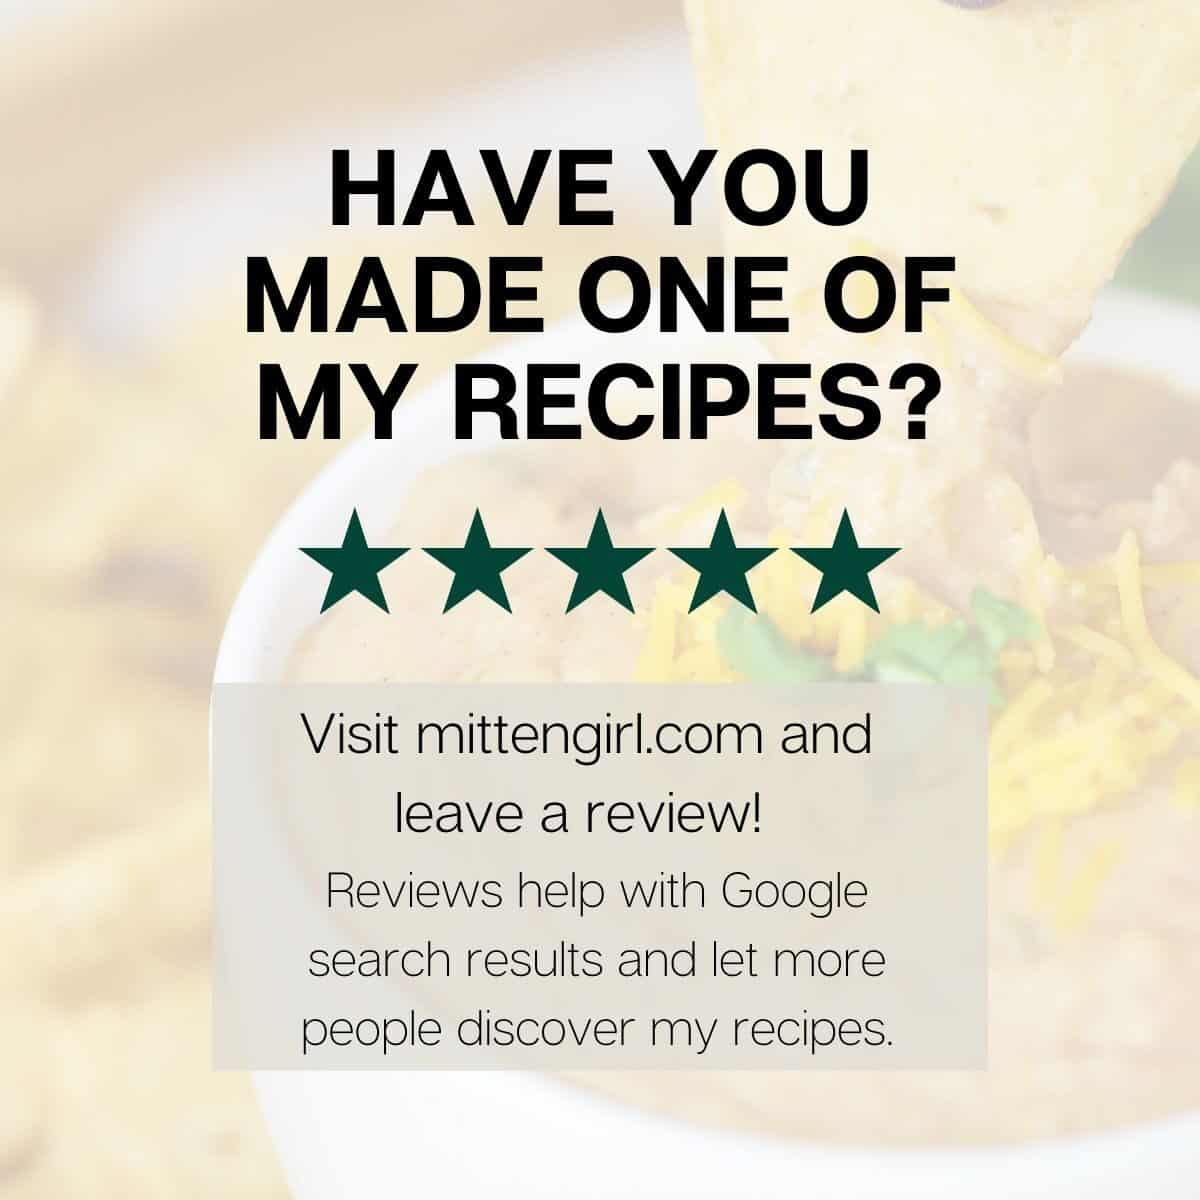 Please review my recipes on my website so Google shows them to more people!